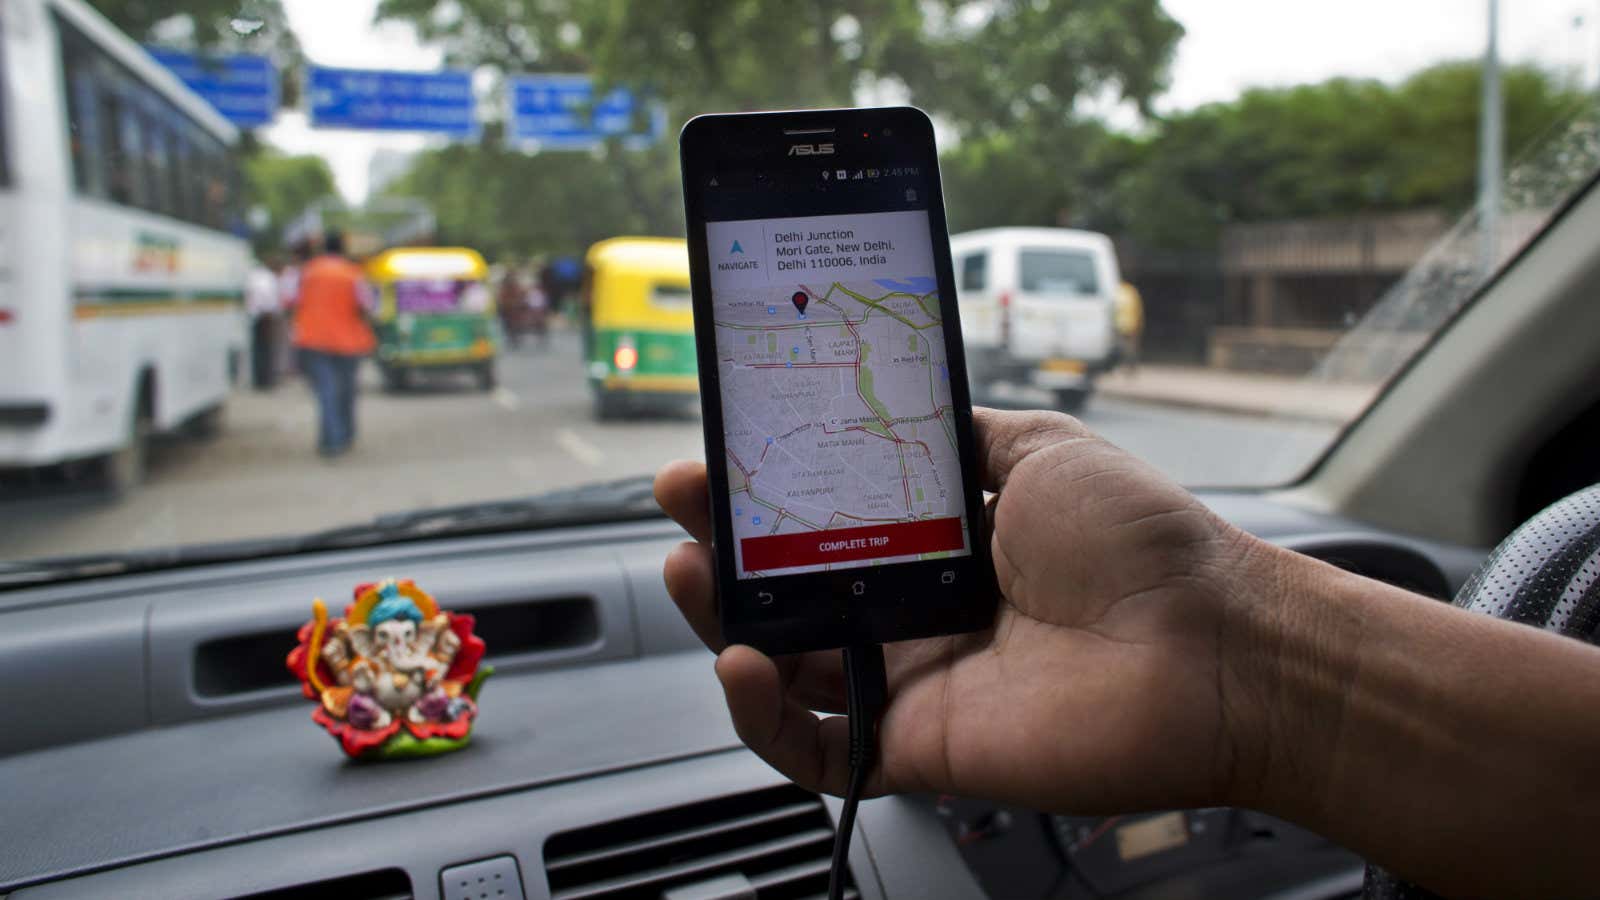 An Indian cab driver displays the city map on a smartphone provided by Uber as he drives in New Delhi, India, Friday, July 31, 2015.…